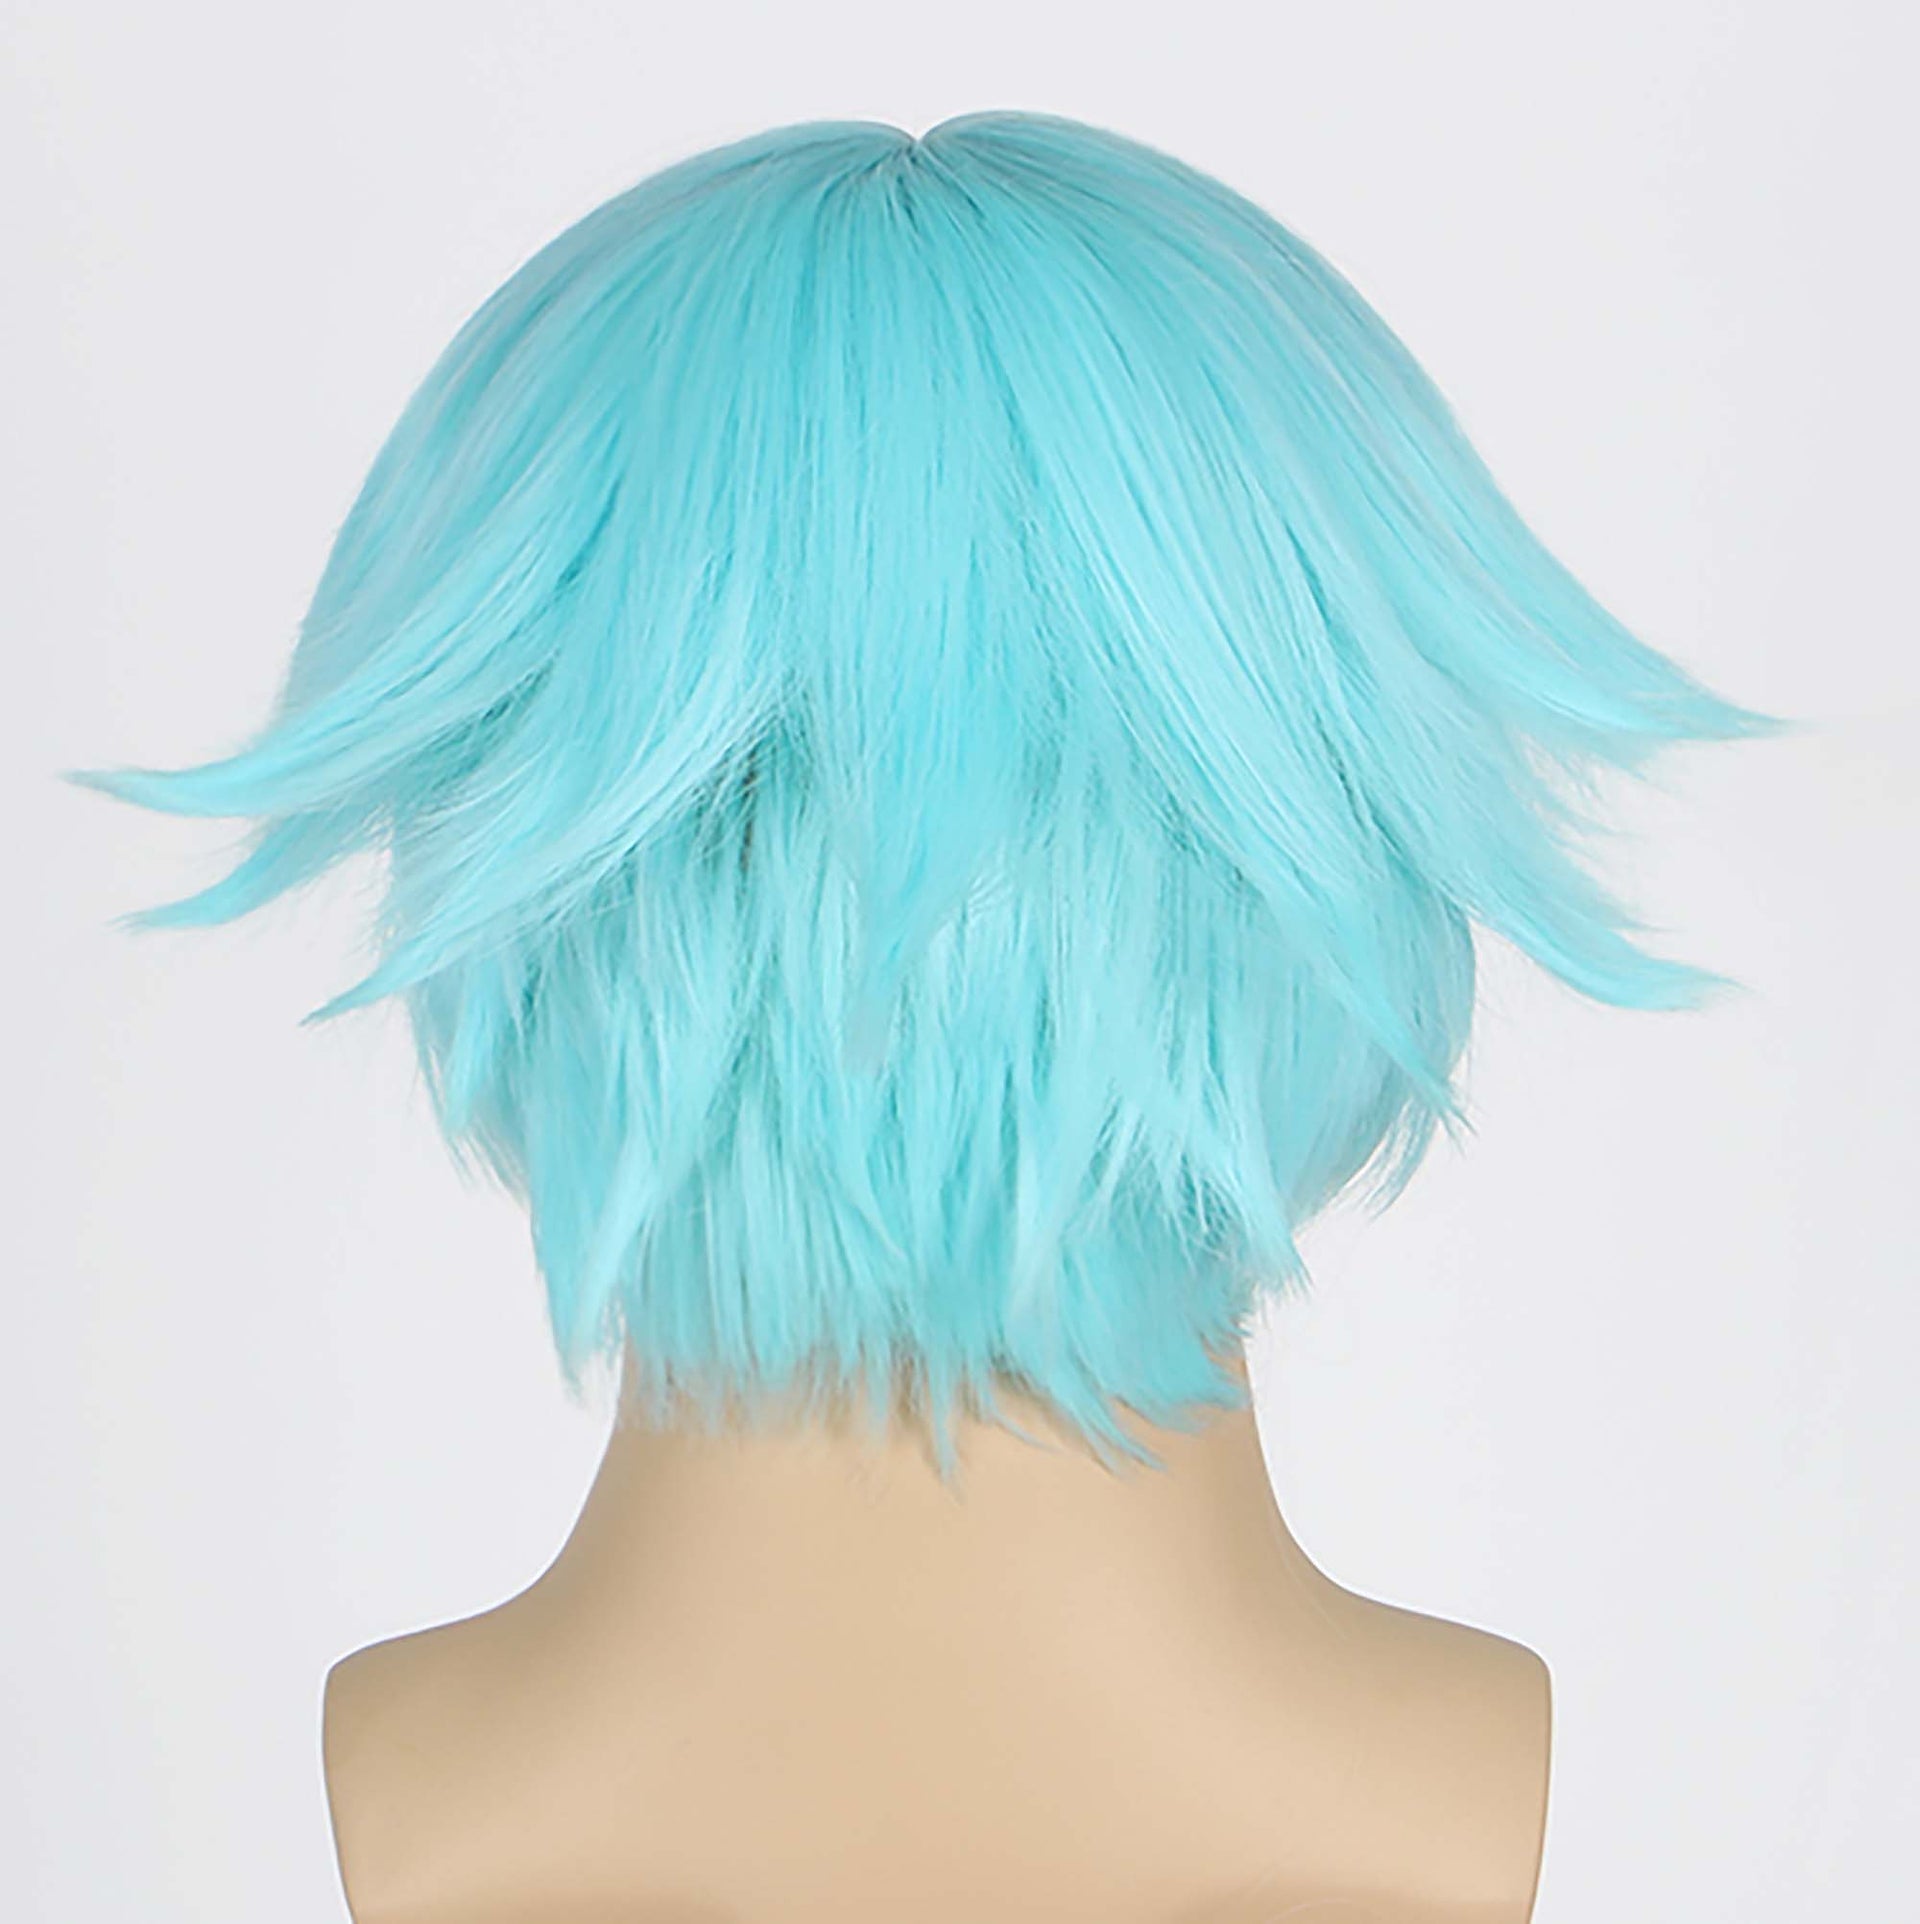 nevermindyrhead Men Aqua Blue Short Straight Fringe Bangs Anime Cosplay Wig With Top Parting